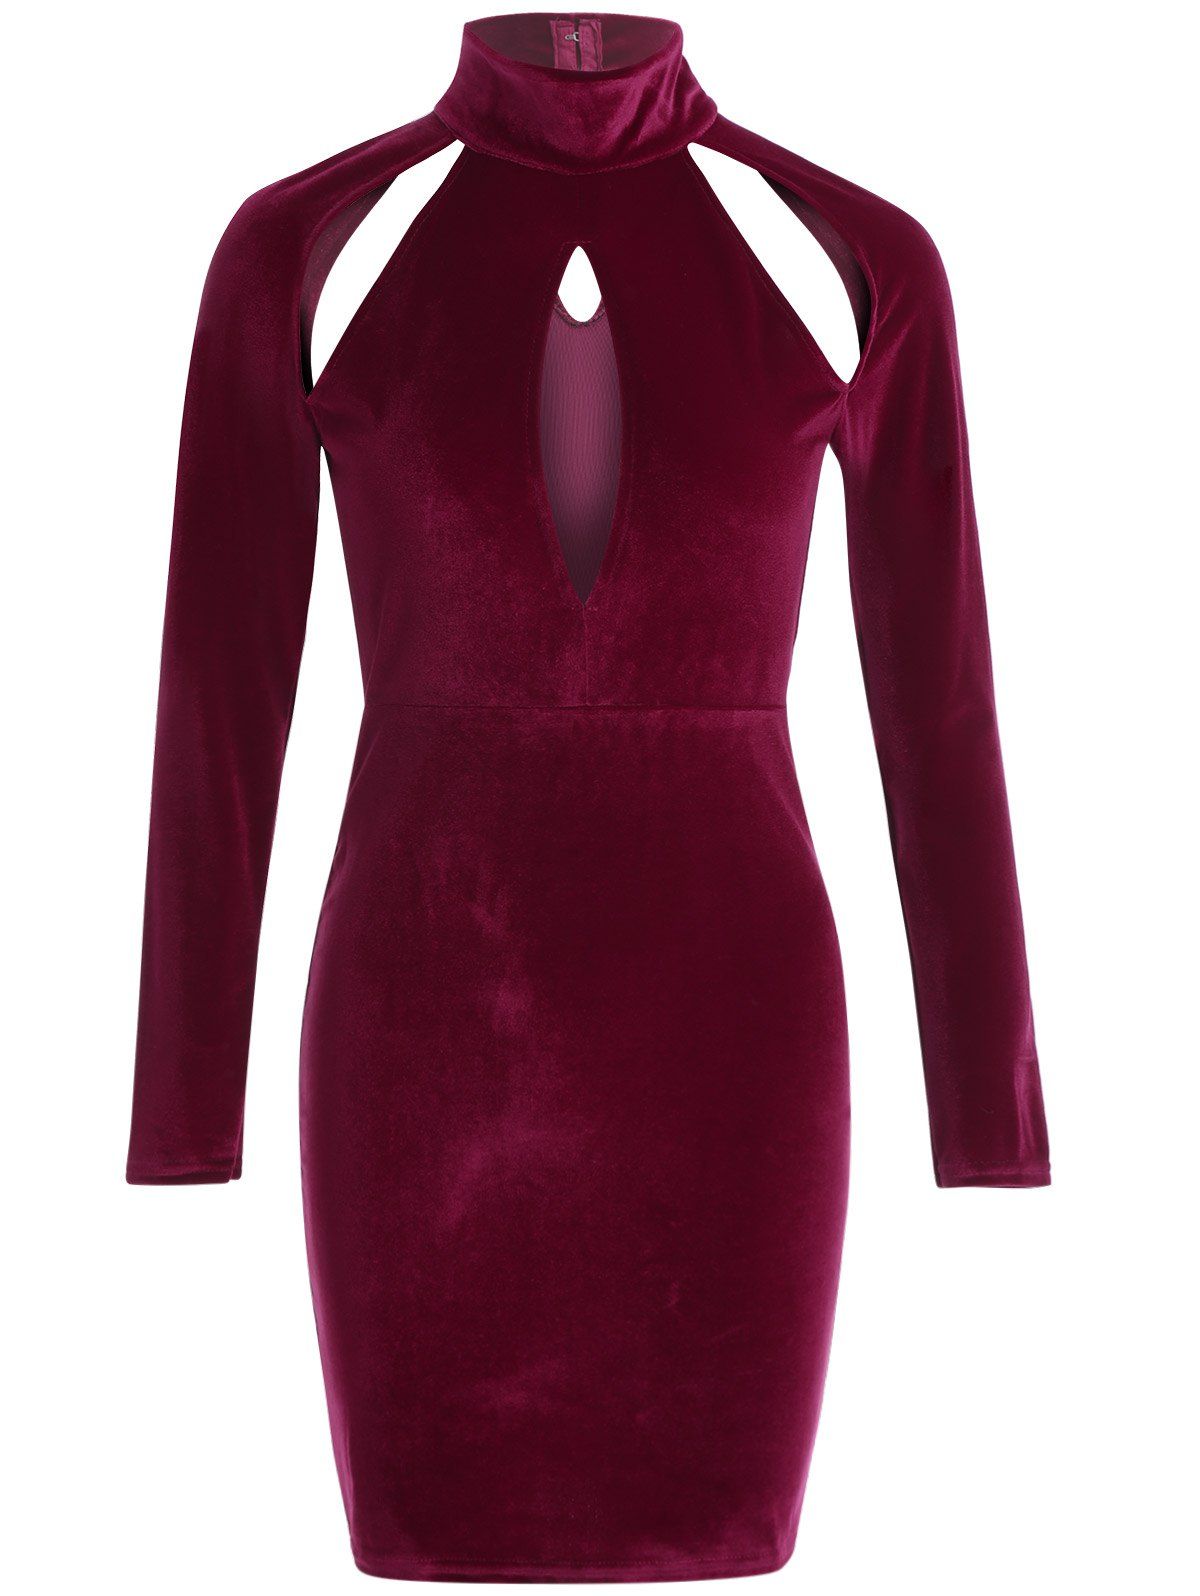 [41% OFF] 2020 Long Sleeve Cut Out High Neck Bodycon Velvet Dress In ...